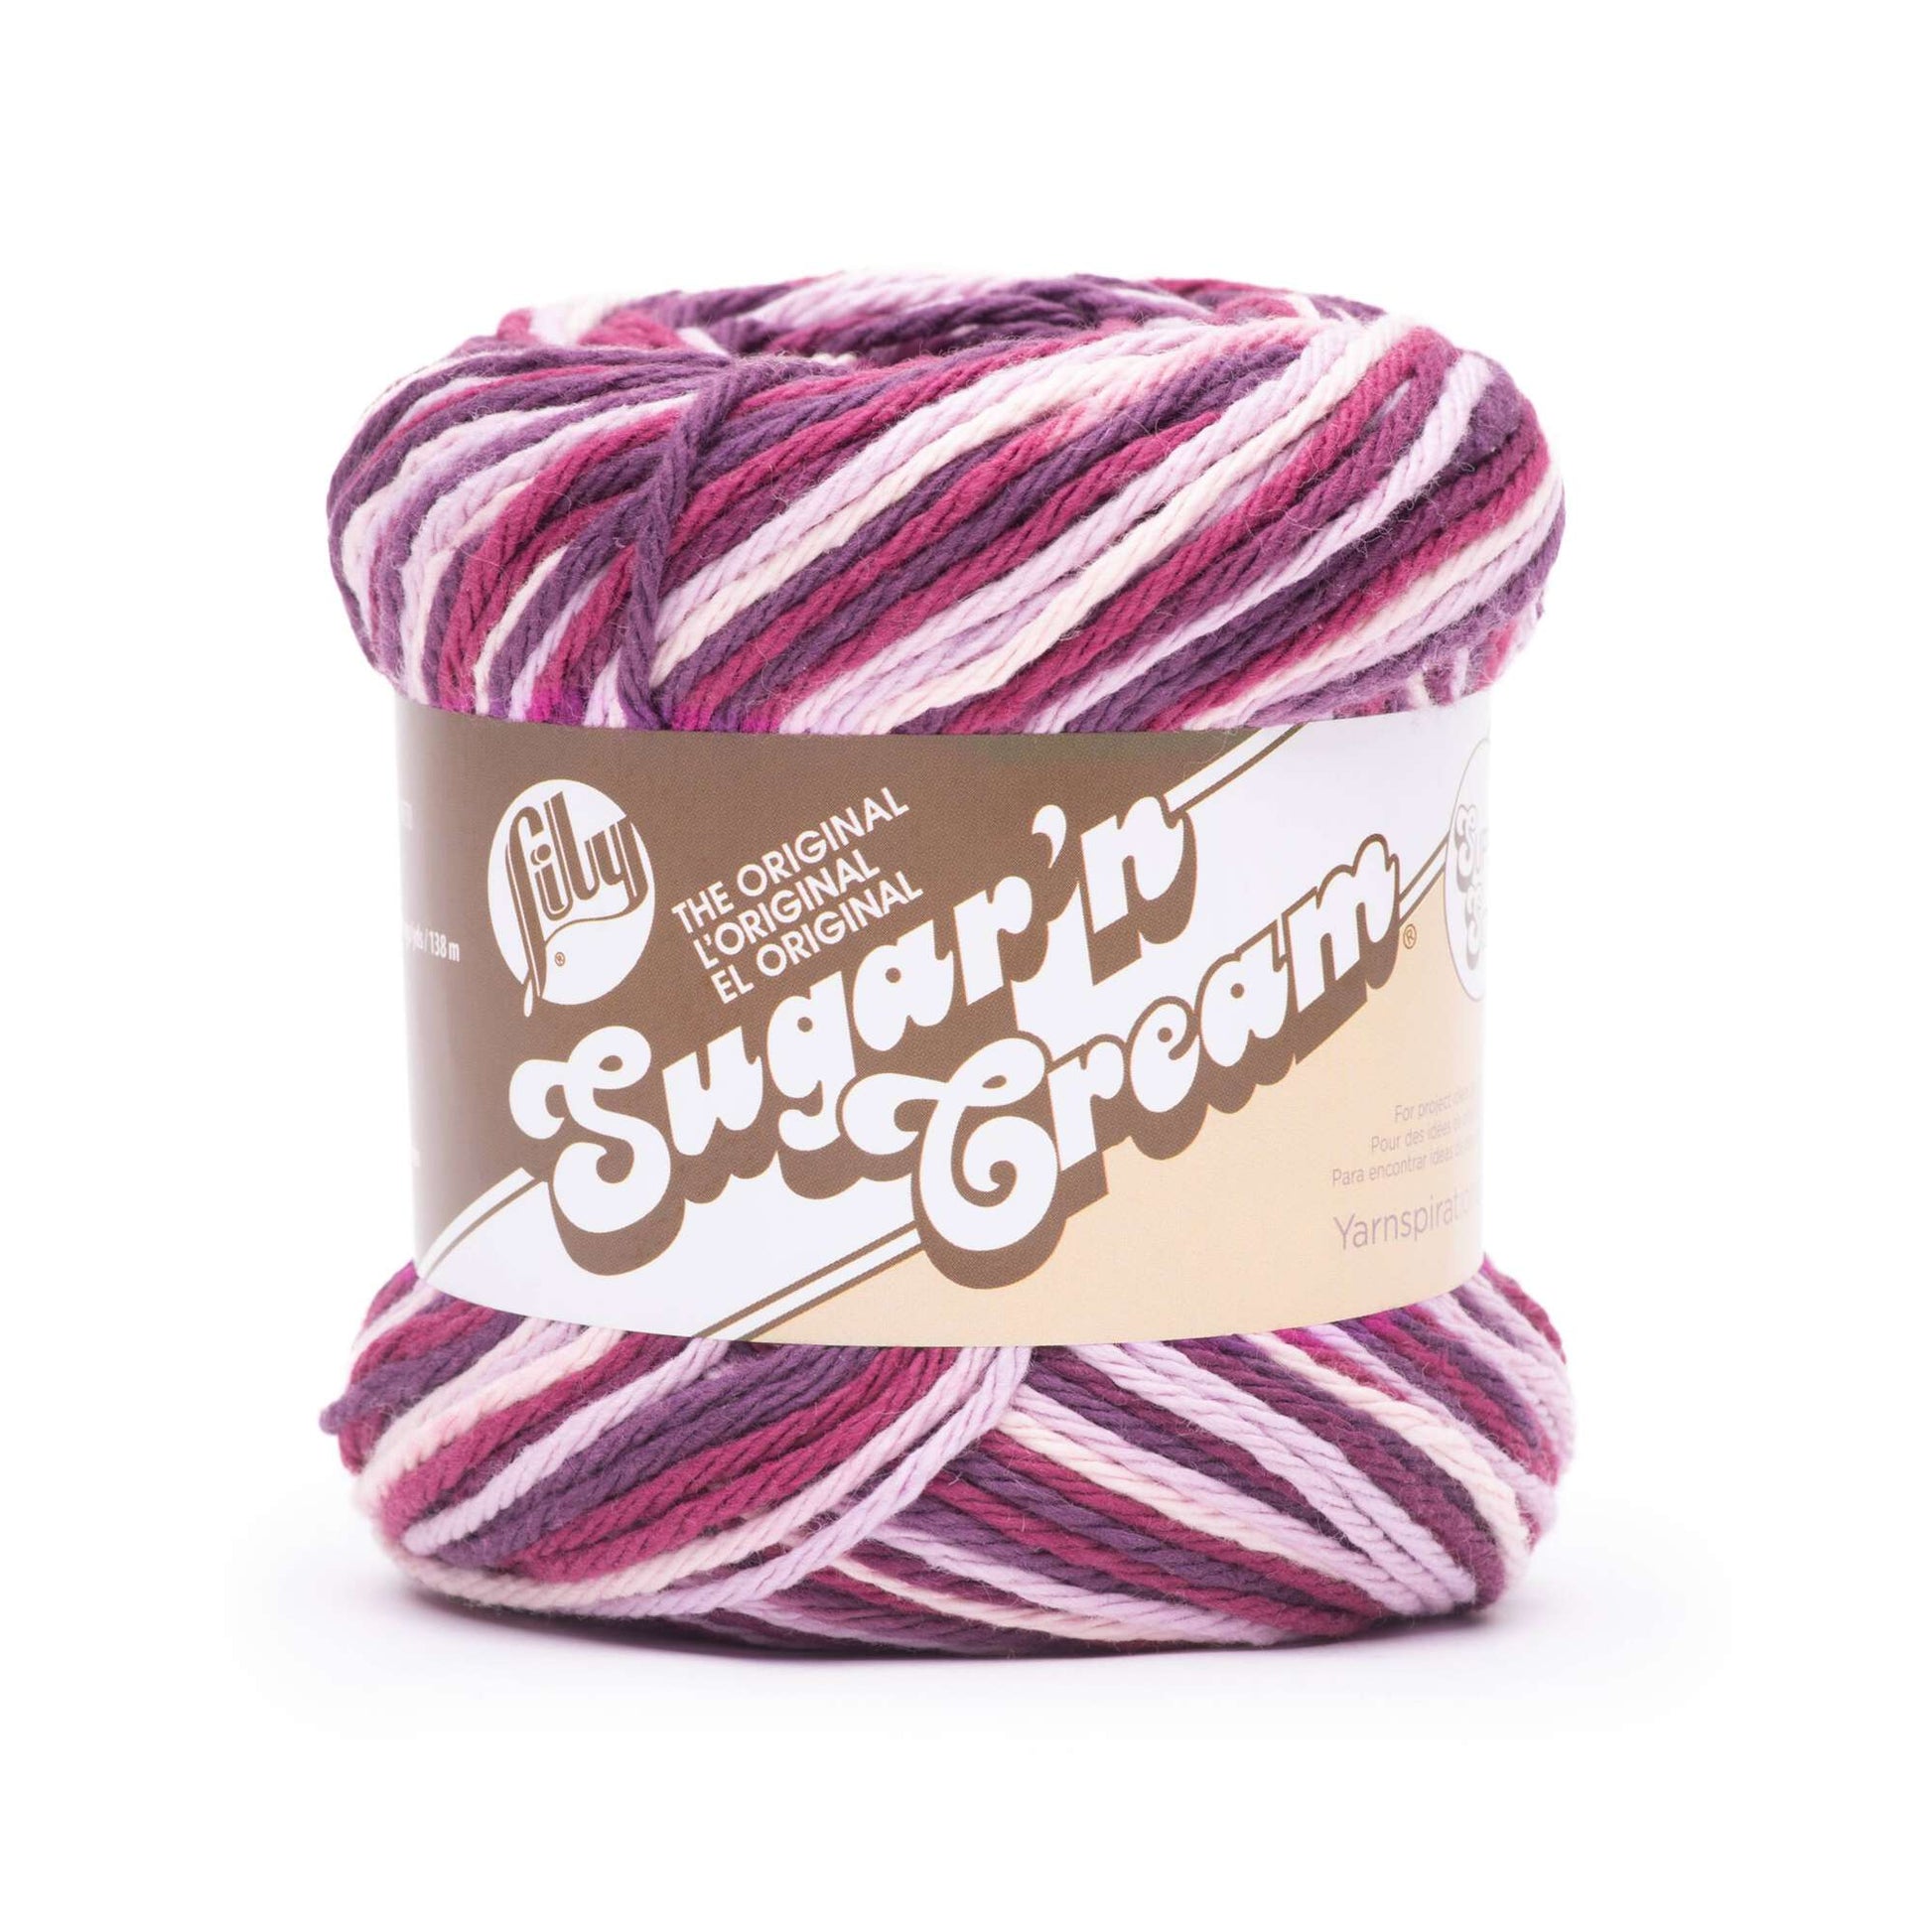 Lily Sugar'n Cream Yarn - Ombres-Greige Ombre, 1 count - Harris Teeter